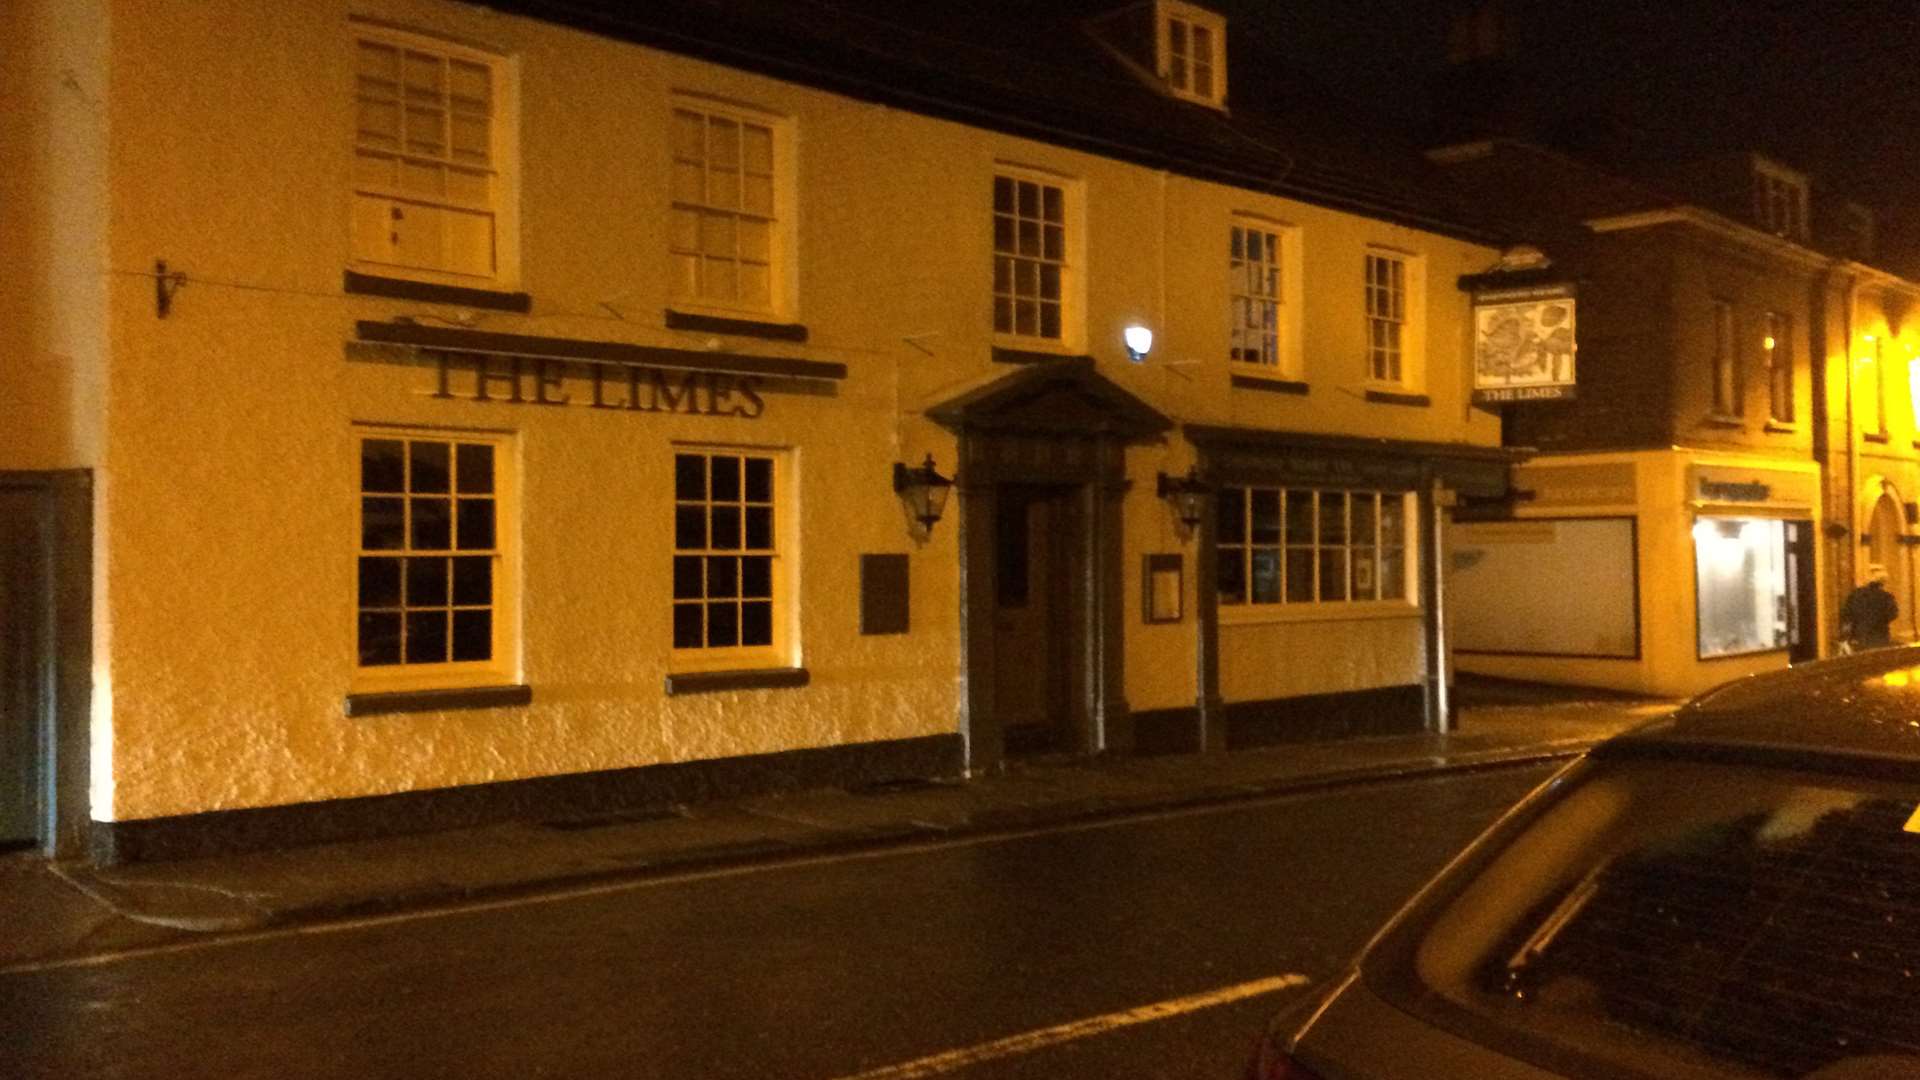 The Limes was among the pubs to close for the evening